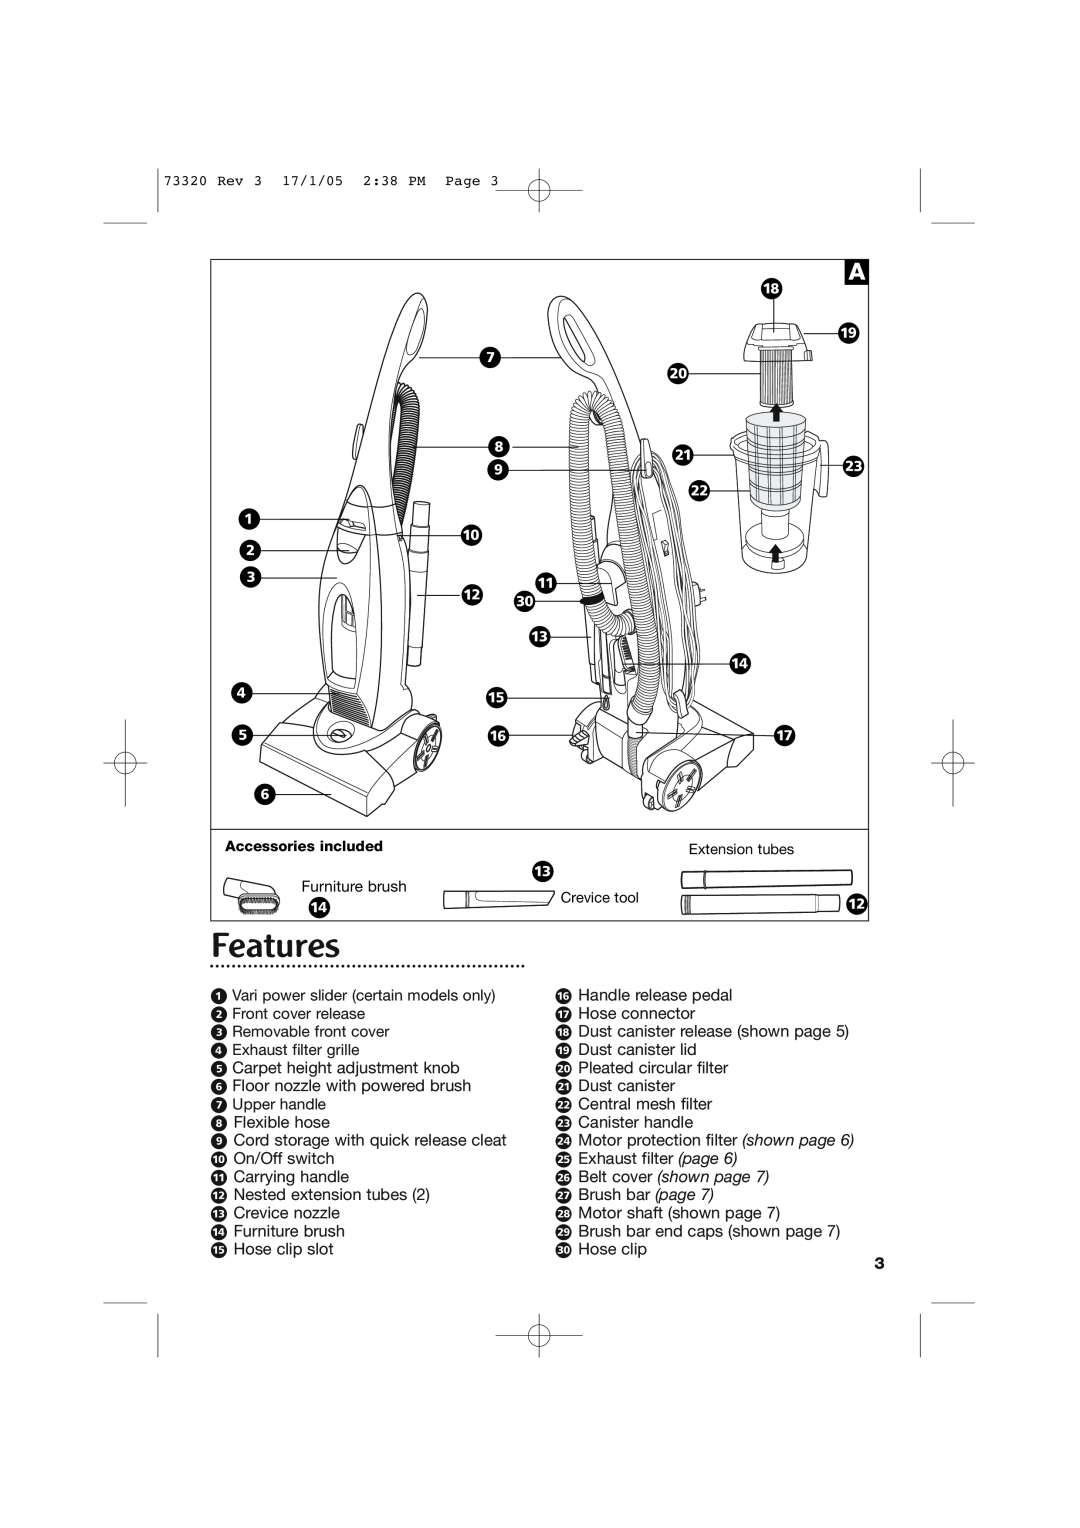 Morphy Richards Upright Bagless Vacuum Cleaner manual Features 